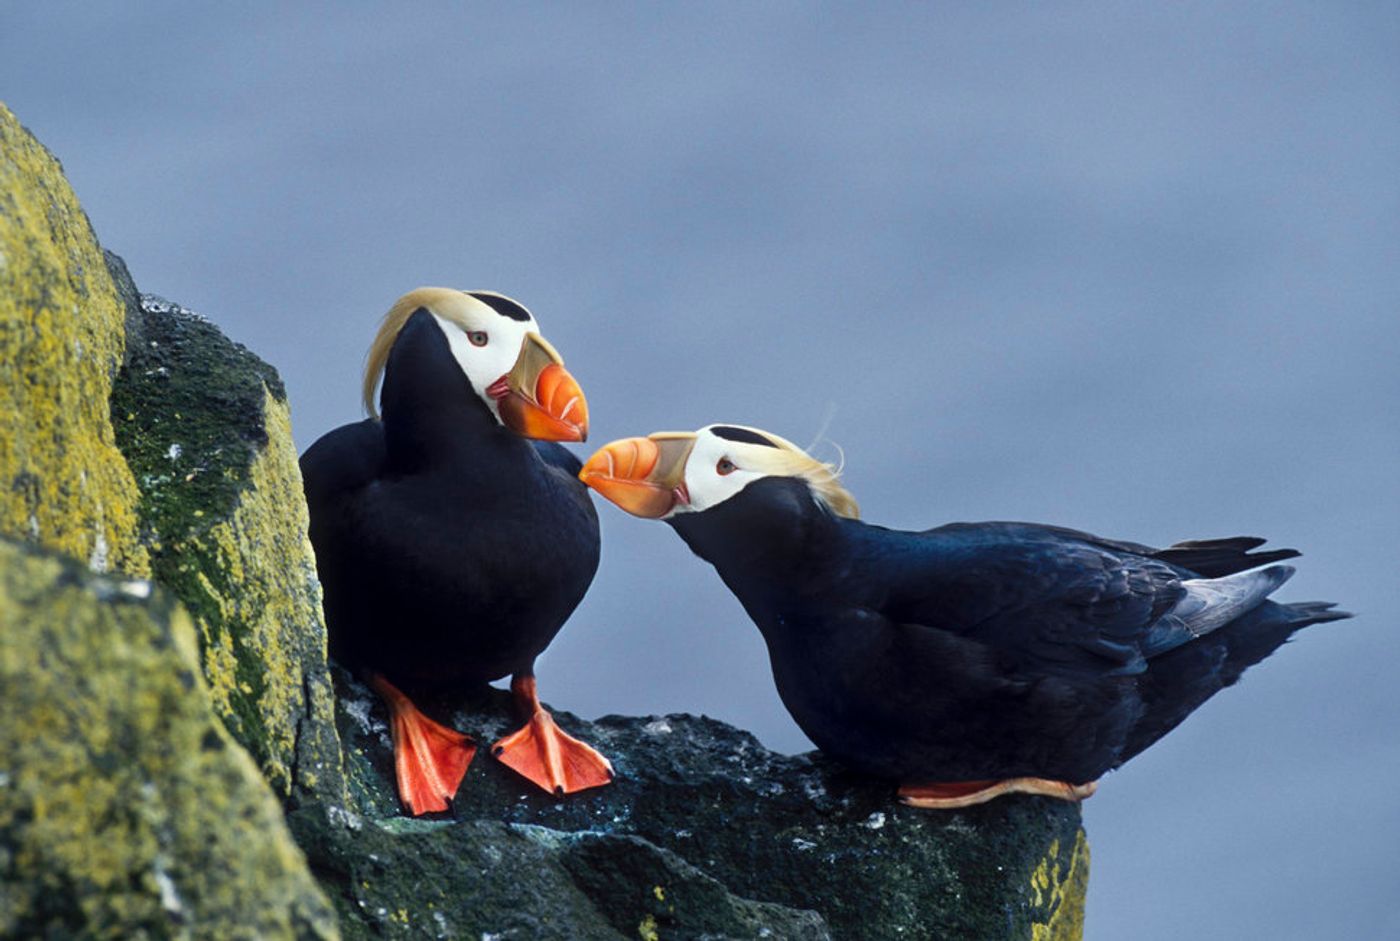 Two tufted puffins engage in a mating ritual on the cliffs of St. Paul. Photo: Patrick J. Endres/ Getty Images